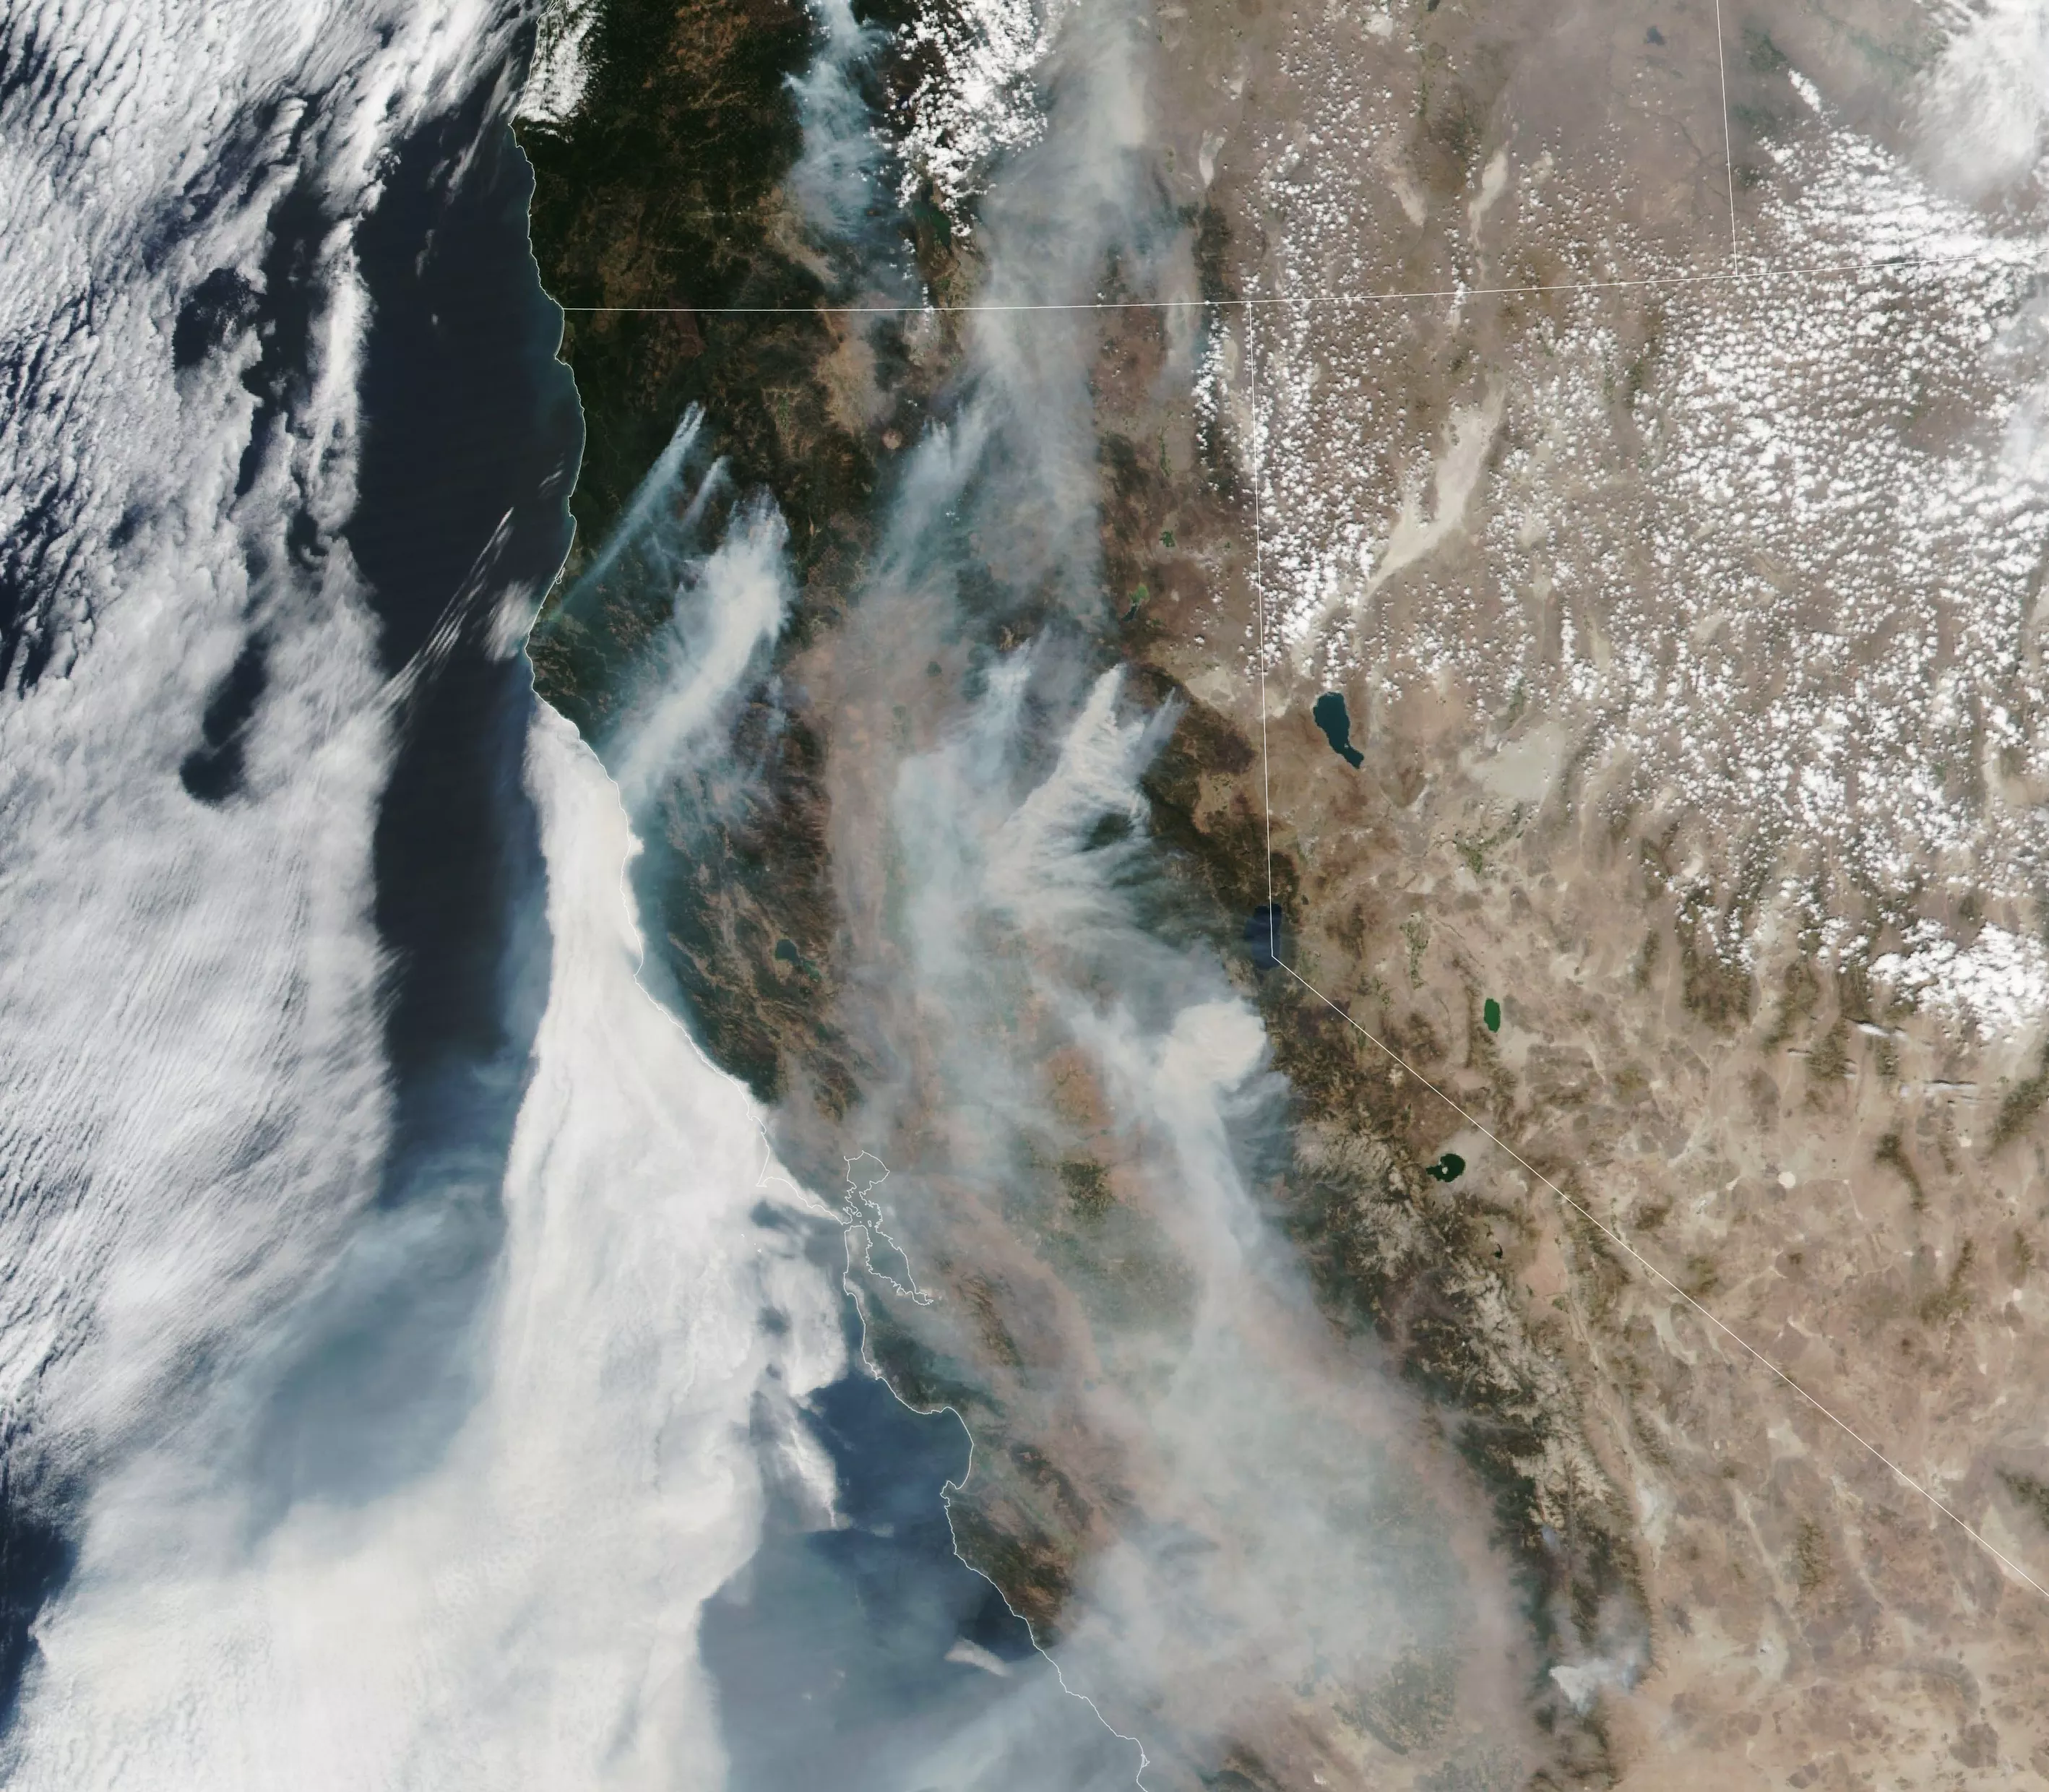 Image of wildfires over the westcoast in California.